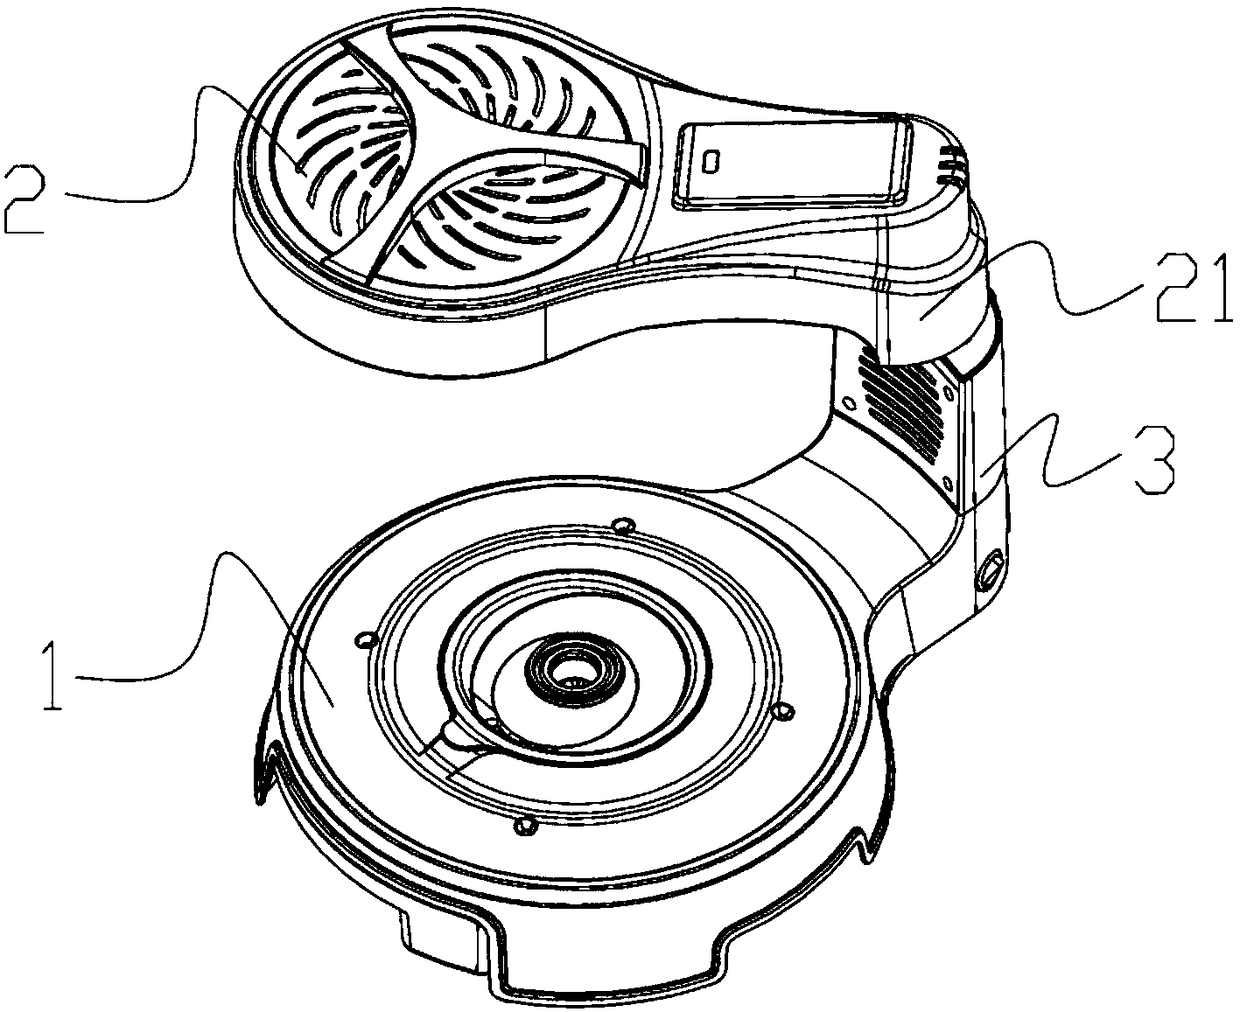 Locking structure of rotary cooker